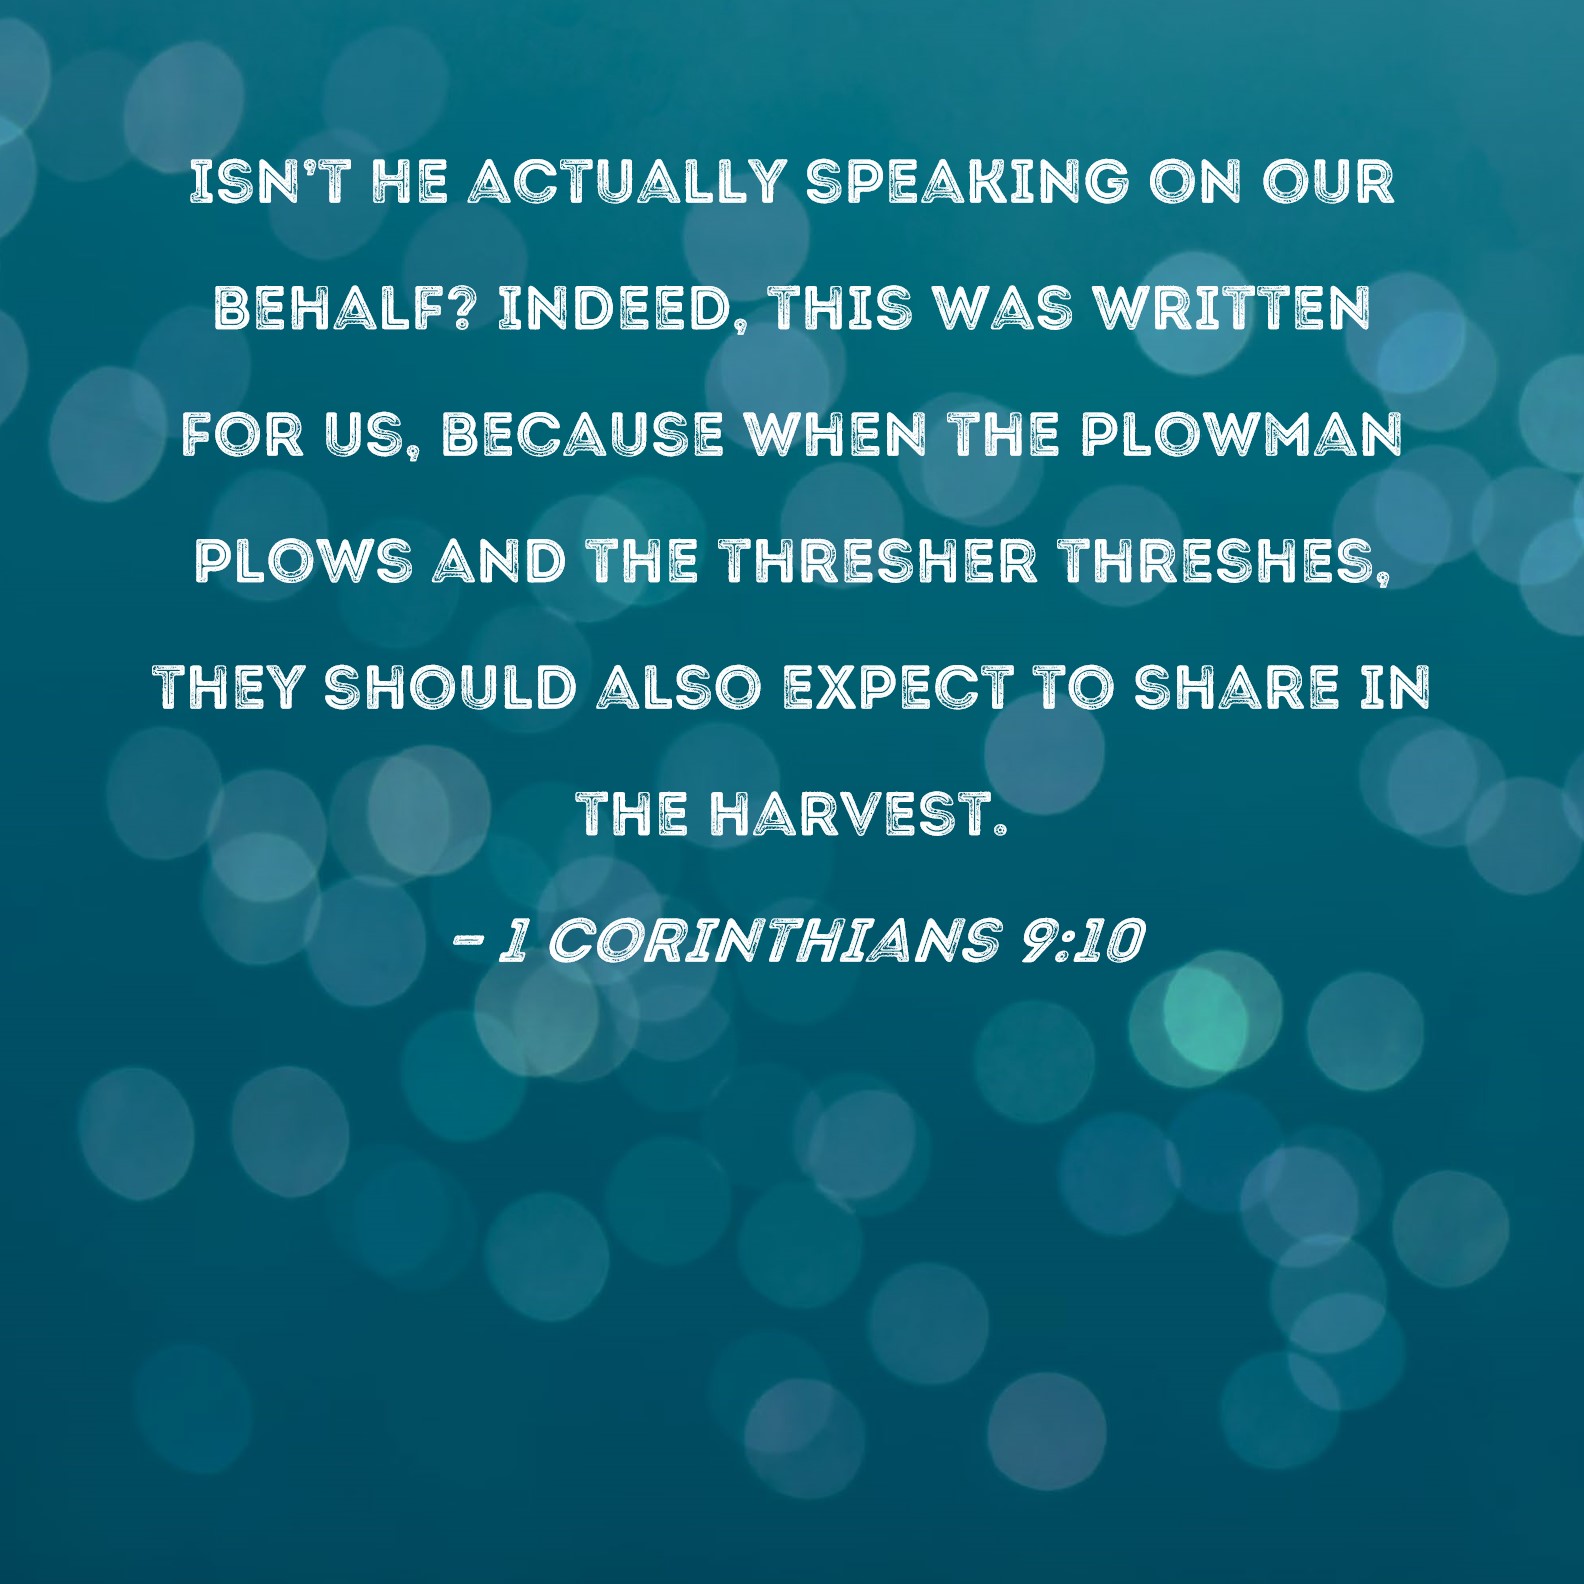 1-corinthians-9-10-isn-t-he-actually-speaking-on-our-behalf-indeed